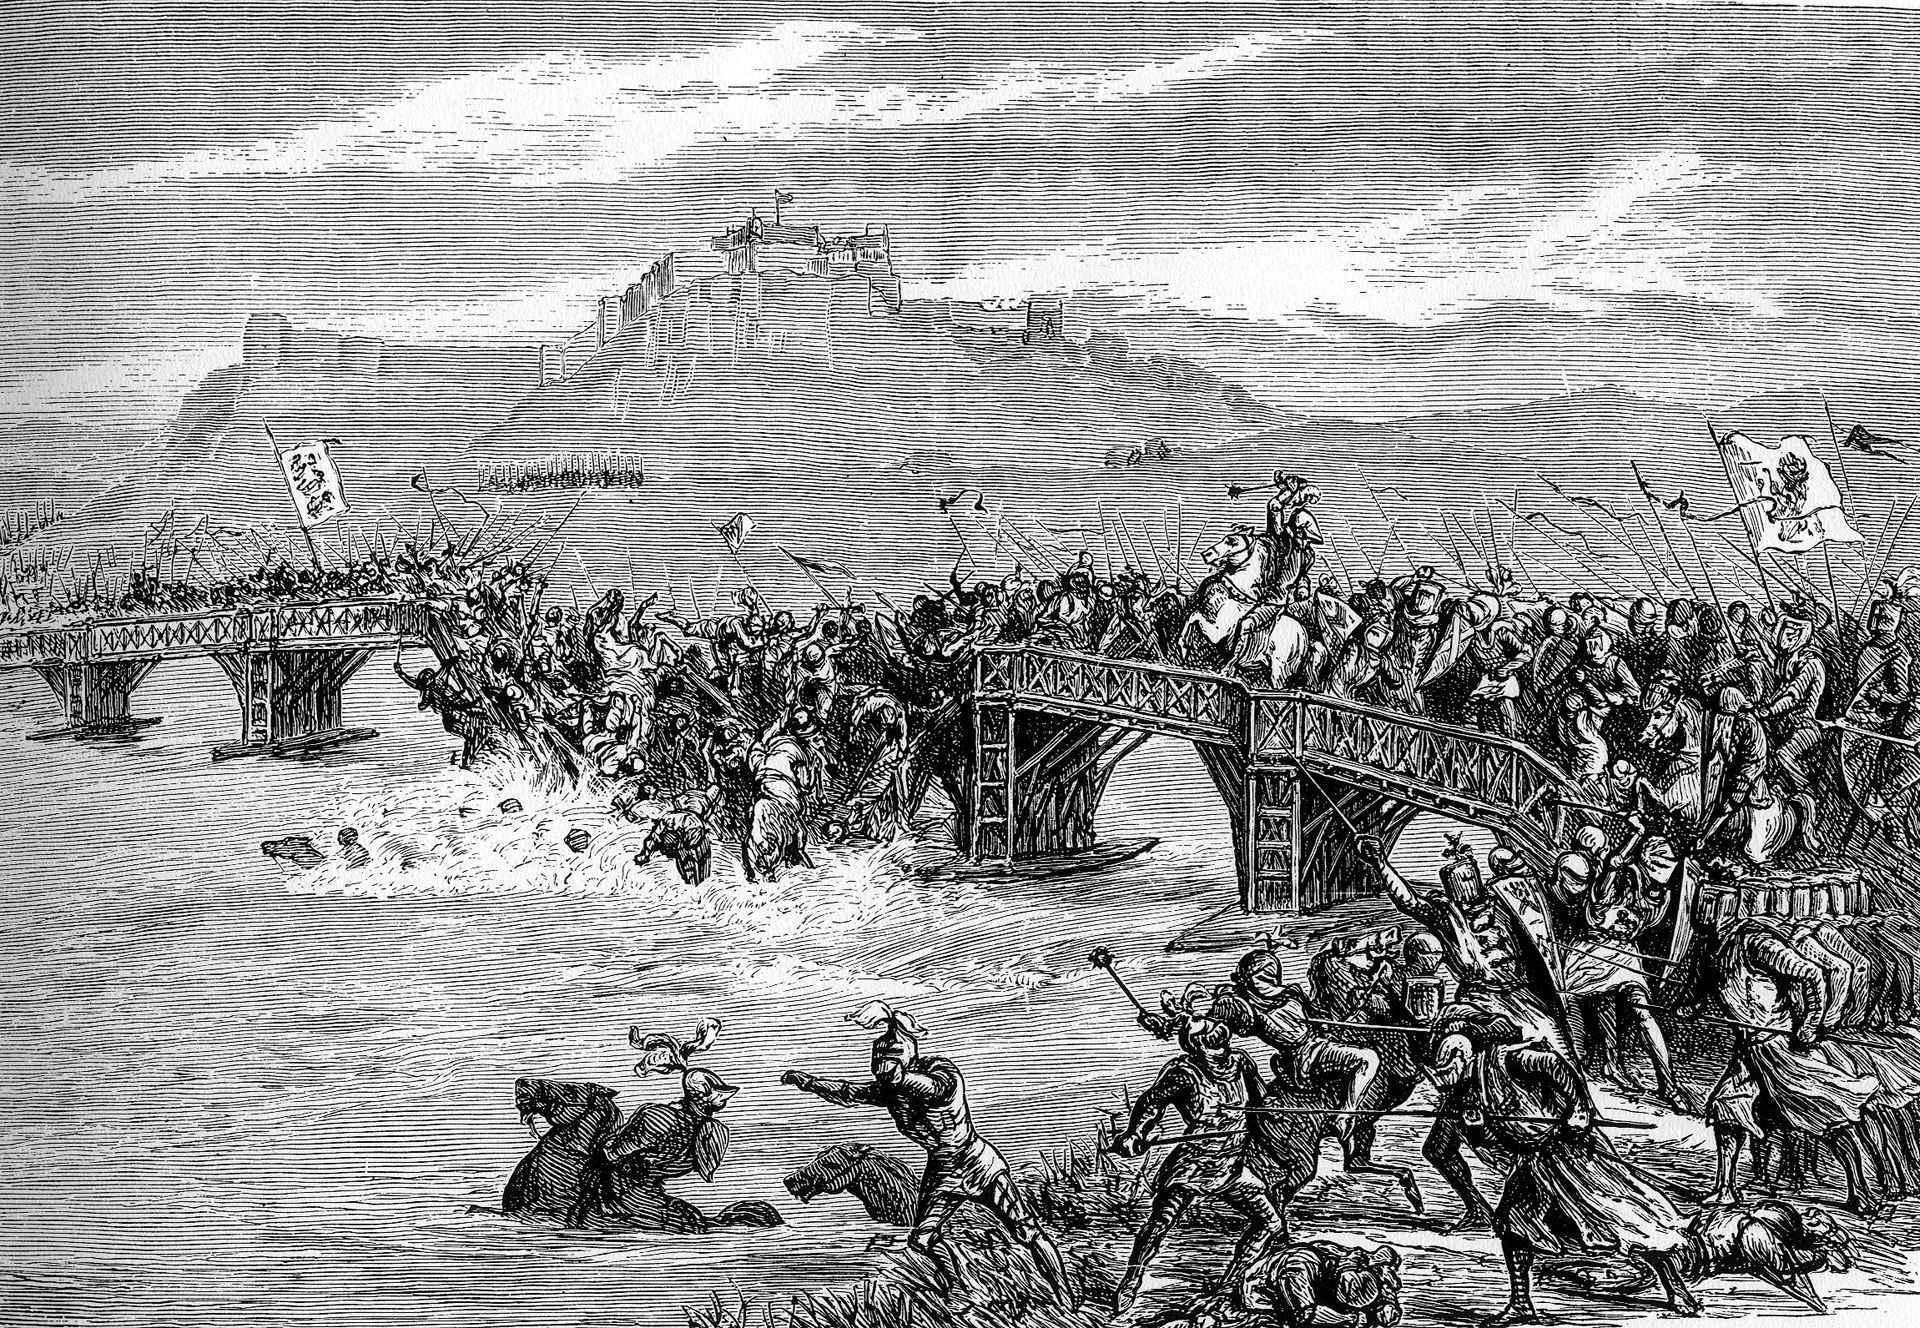 Stirling Castle looms in the background as the wooden bridge gives way under the English army. One account states that Wallace had sabotaged the bridge, but it is equally likely it simply collapsed under the weight of the heavily armored English knights.